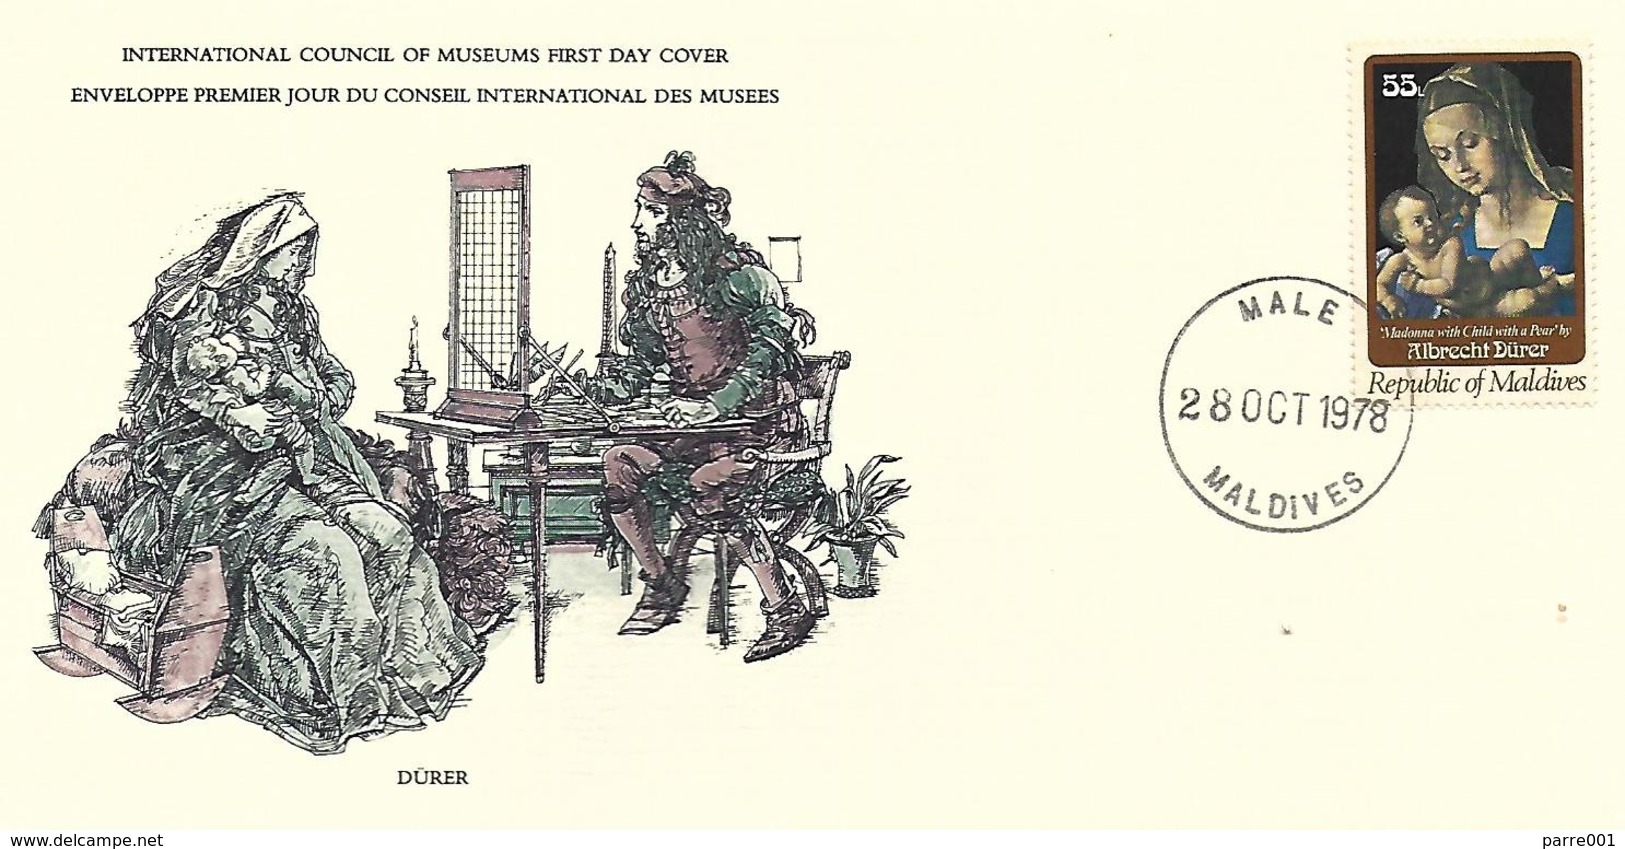 Maldives 1978 Male Albrecht Dürer Madonna With Child And Pear Painting FDC Cover - Madones